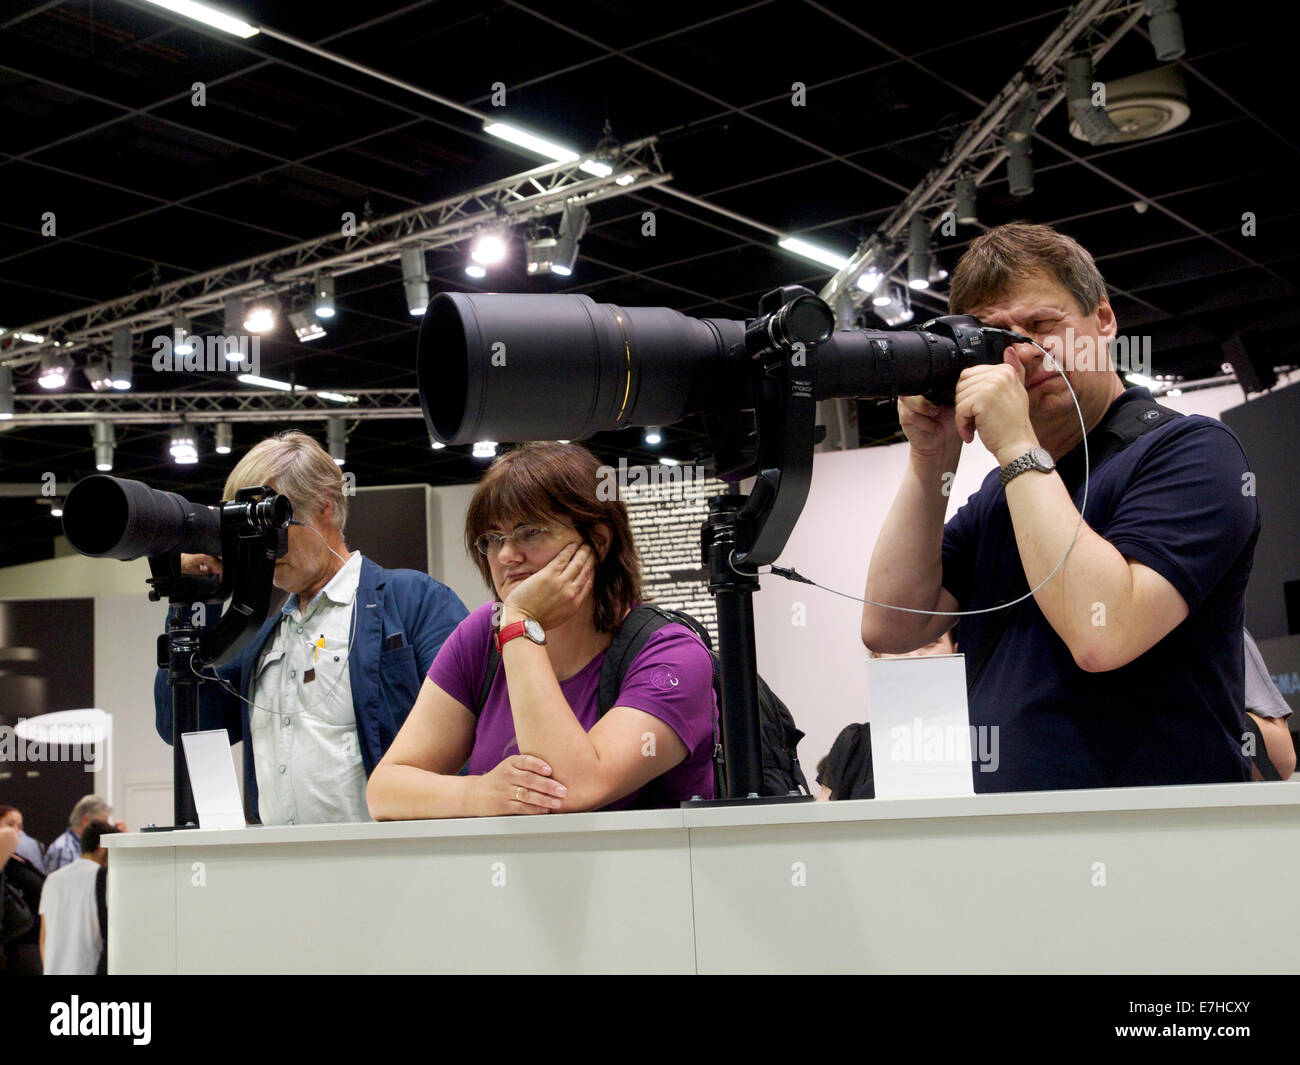 Men trying out really big lenses with woman looking very bored. Photokina 2014, Cologne, Germany Stock Photo